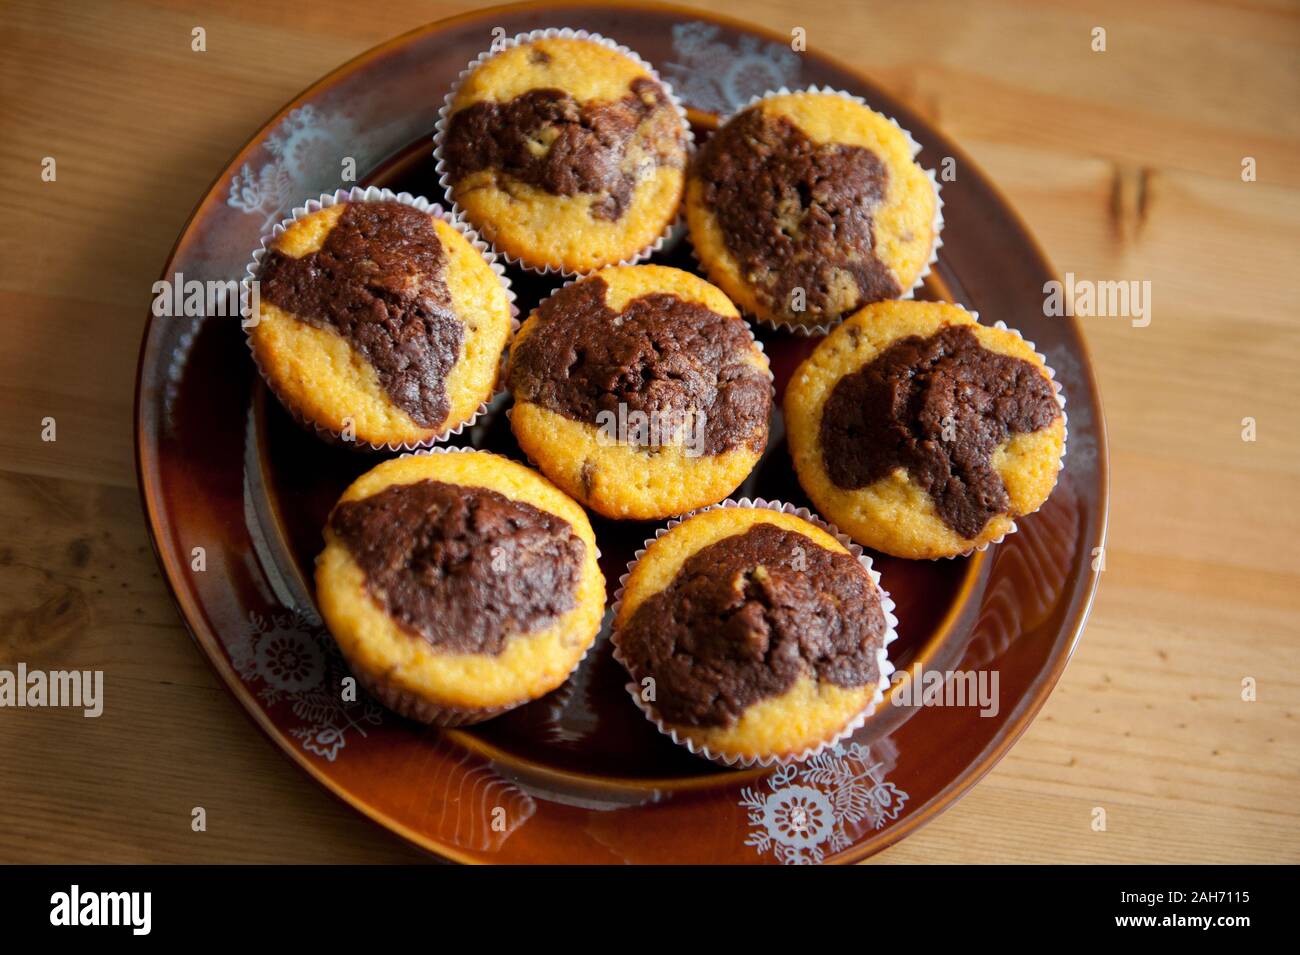 Lemon chocolate homemade muffins, few duo taste delicious cupcakes lying on dark brown plate on table, sweet treats view from above, baked food. Stock Photo